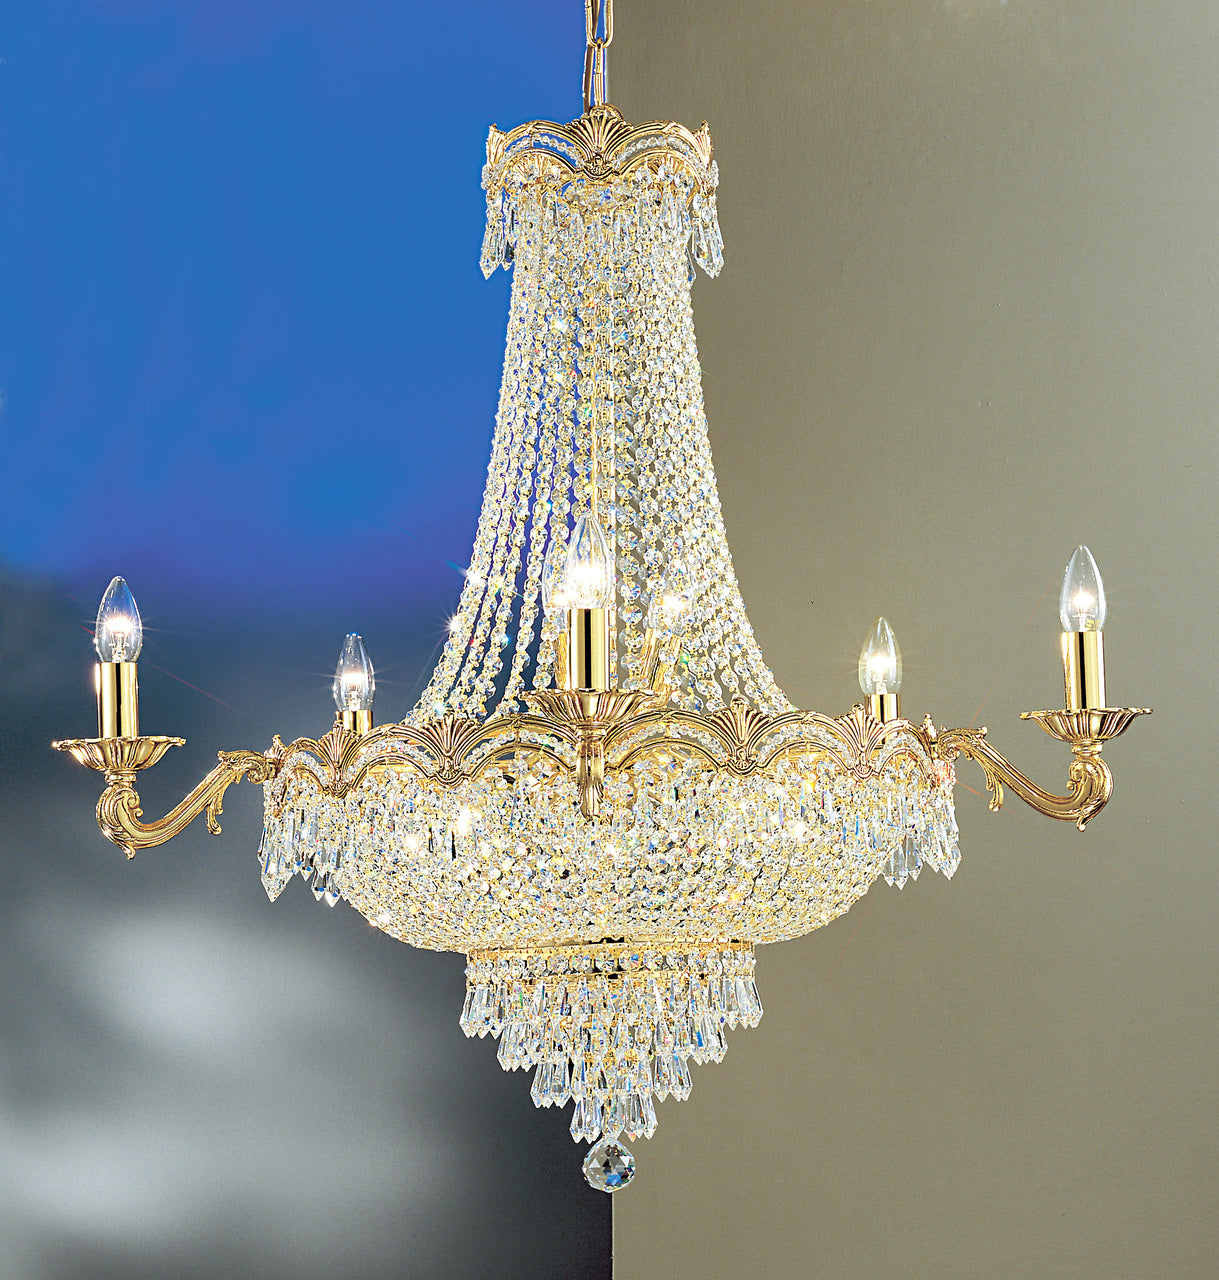 Classic Lighting 1859 G CP Regency II Crystal Chandelier in 24k Gold (Imported from Spain)